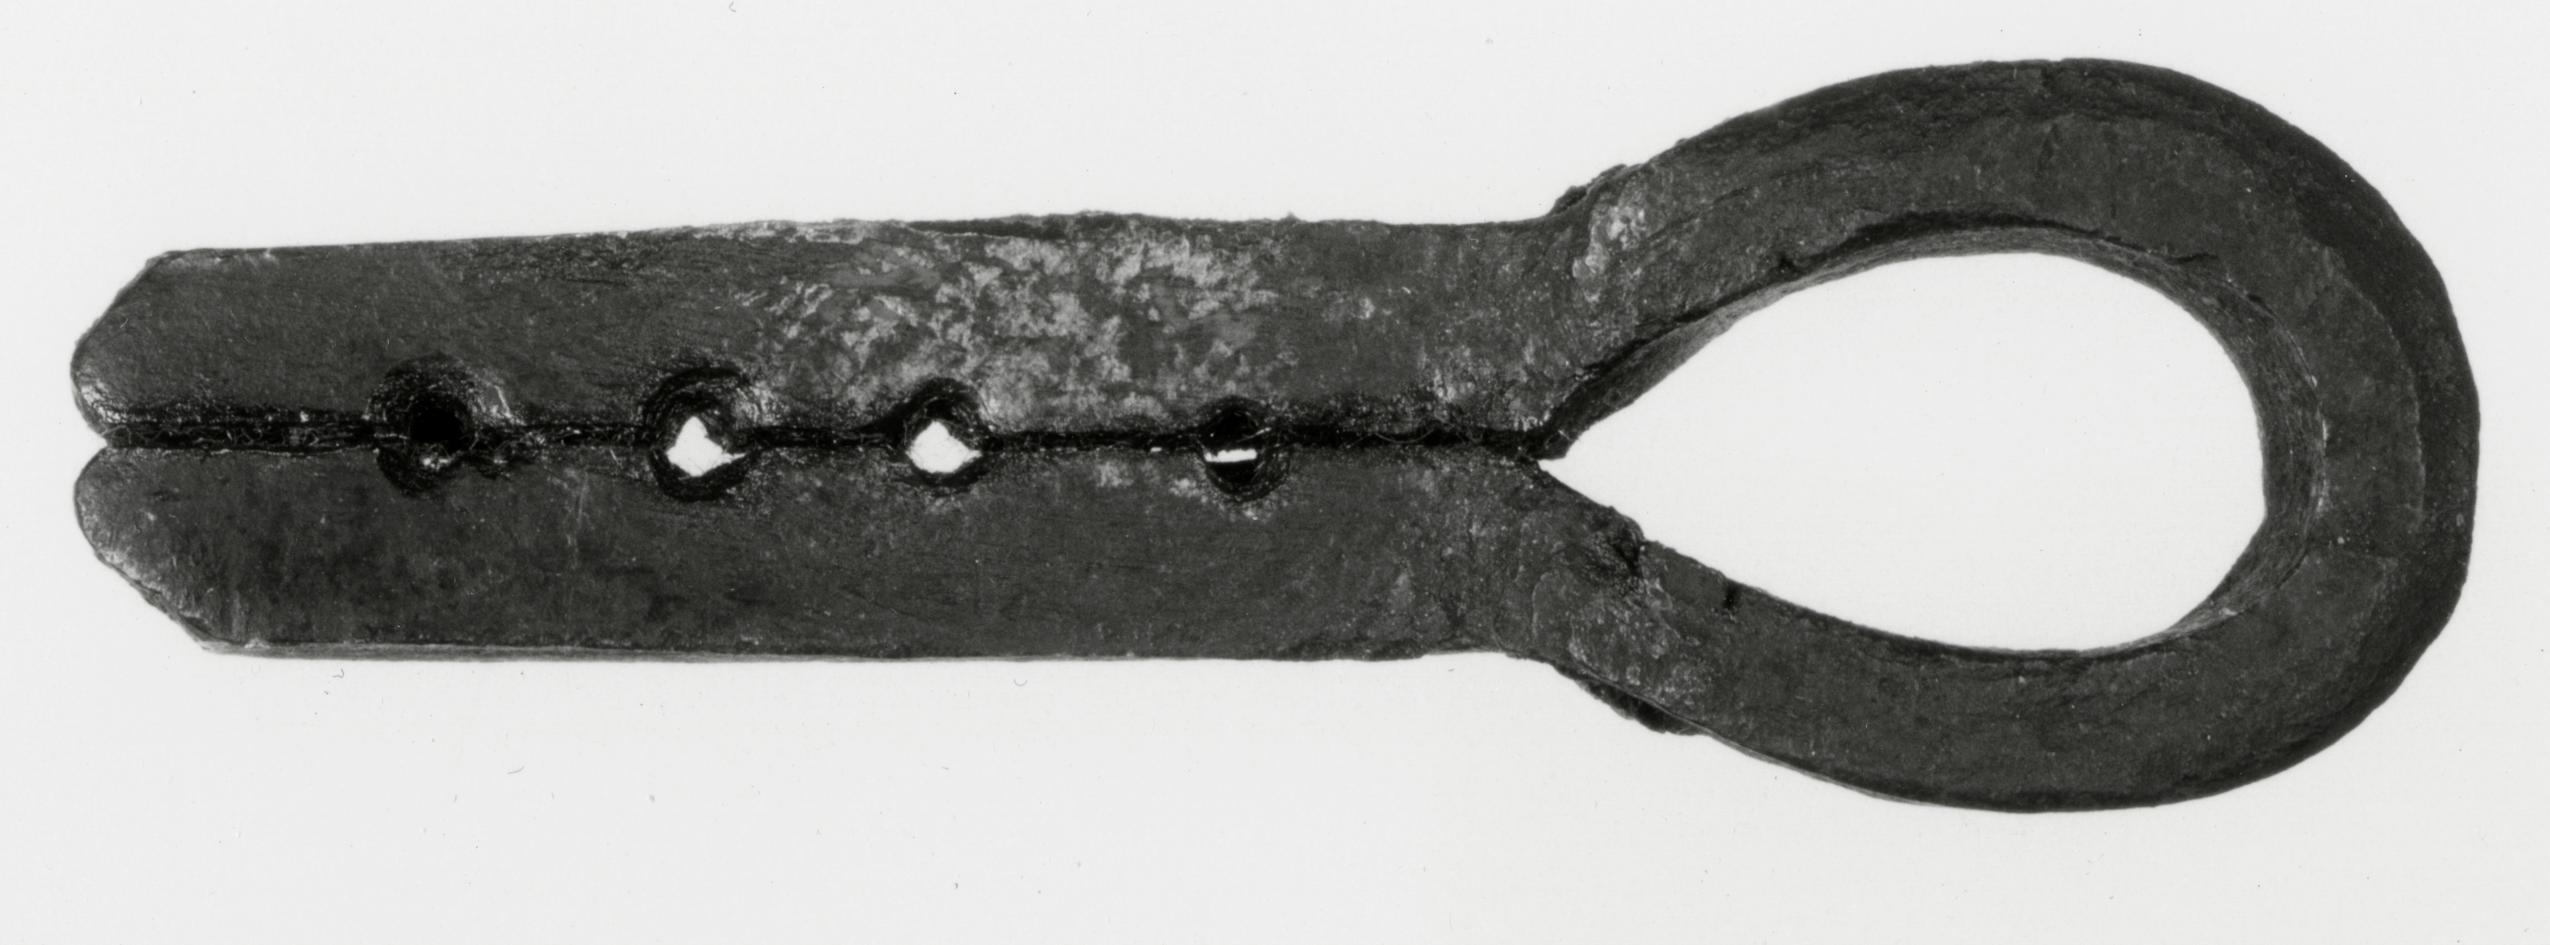 Black and white photograph of a nail and rivet header.